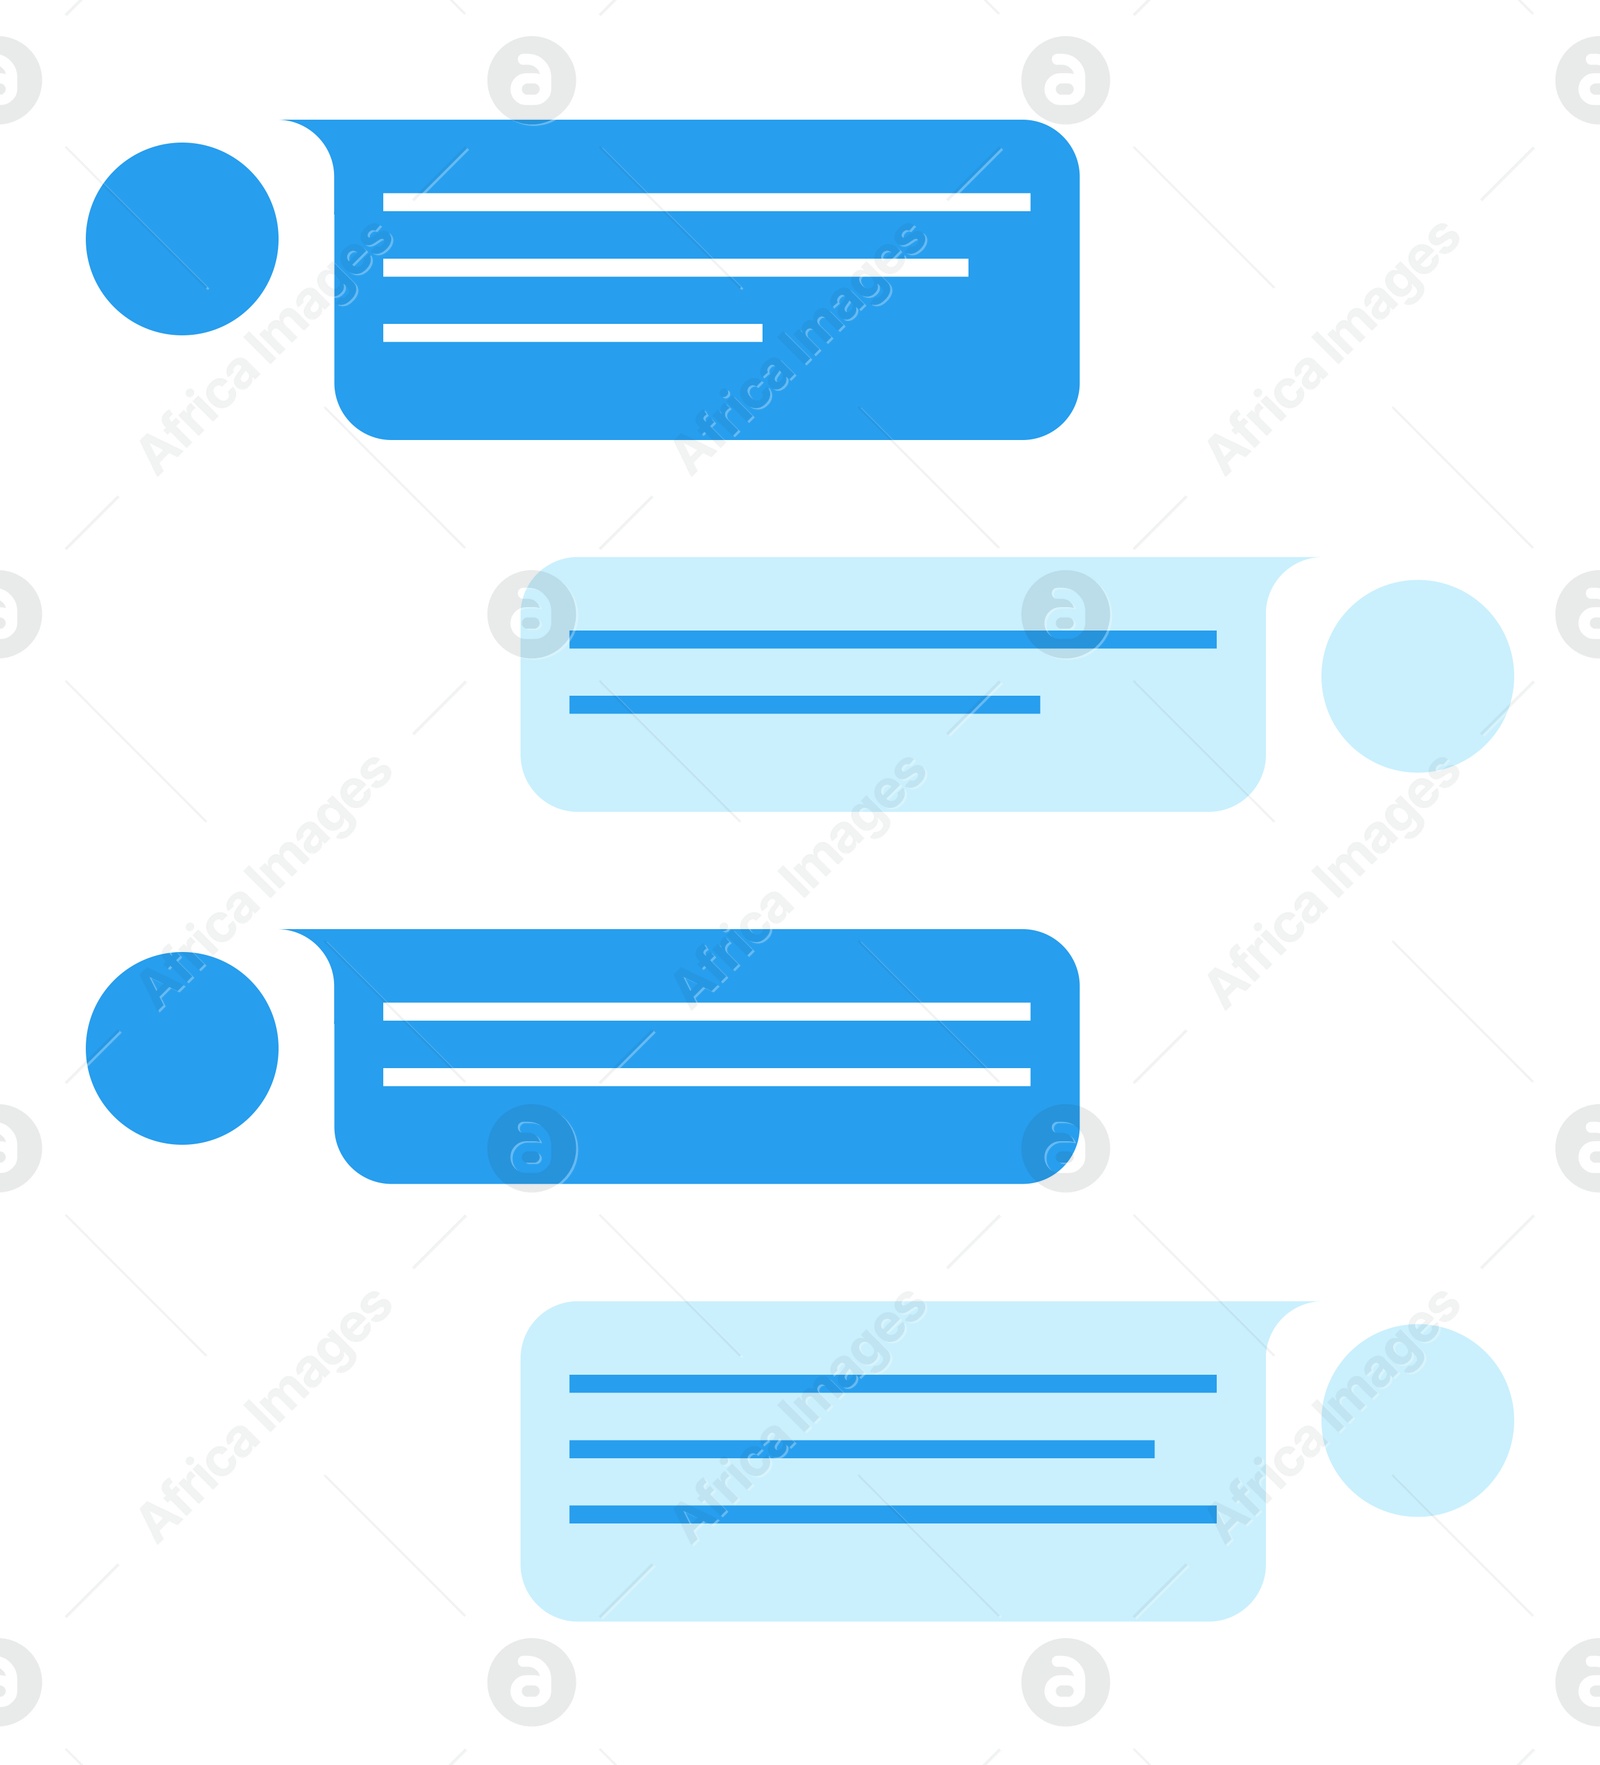 Image of Chat with message bubbles on white background